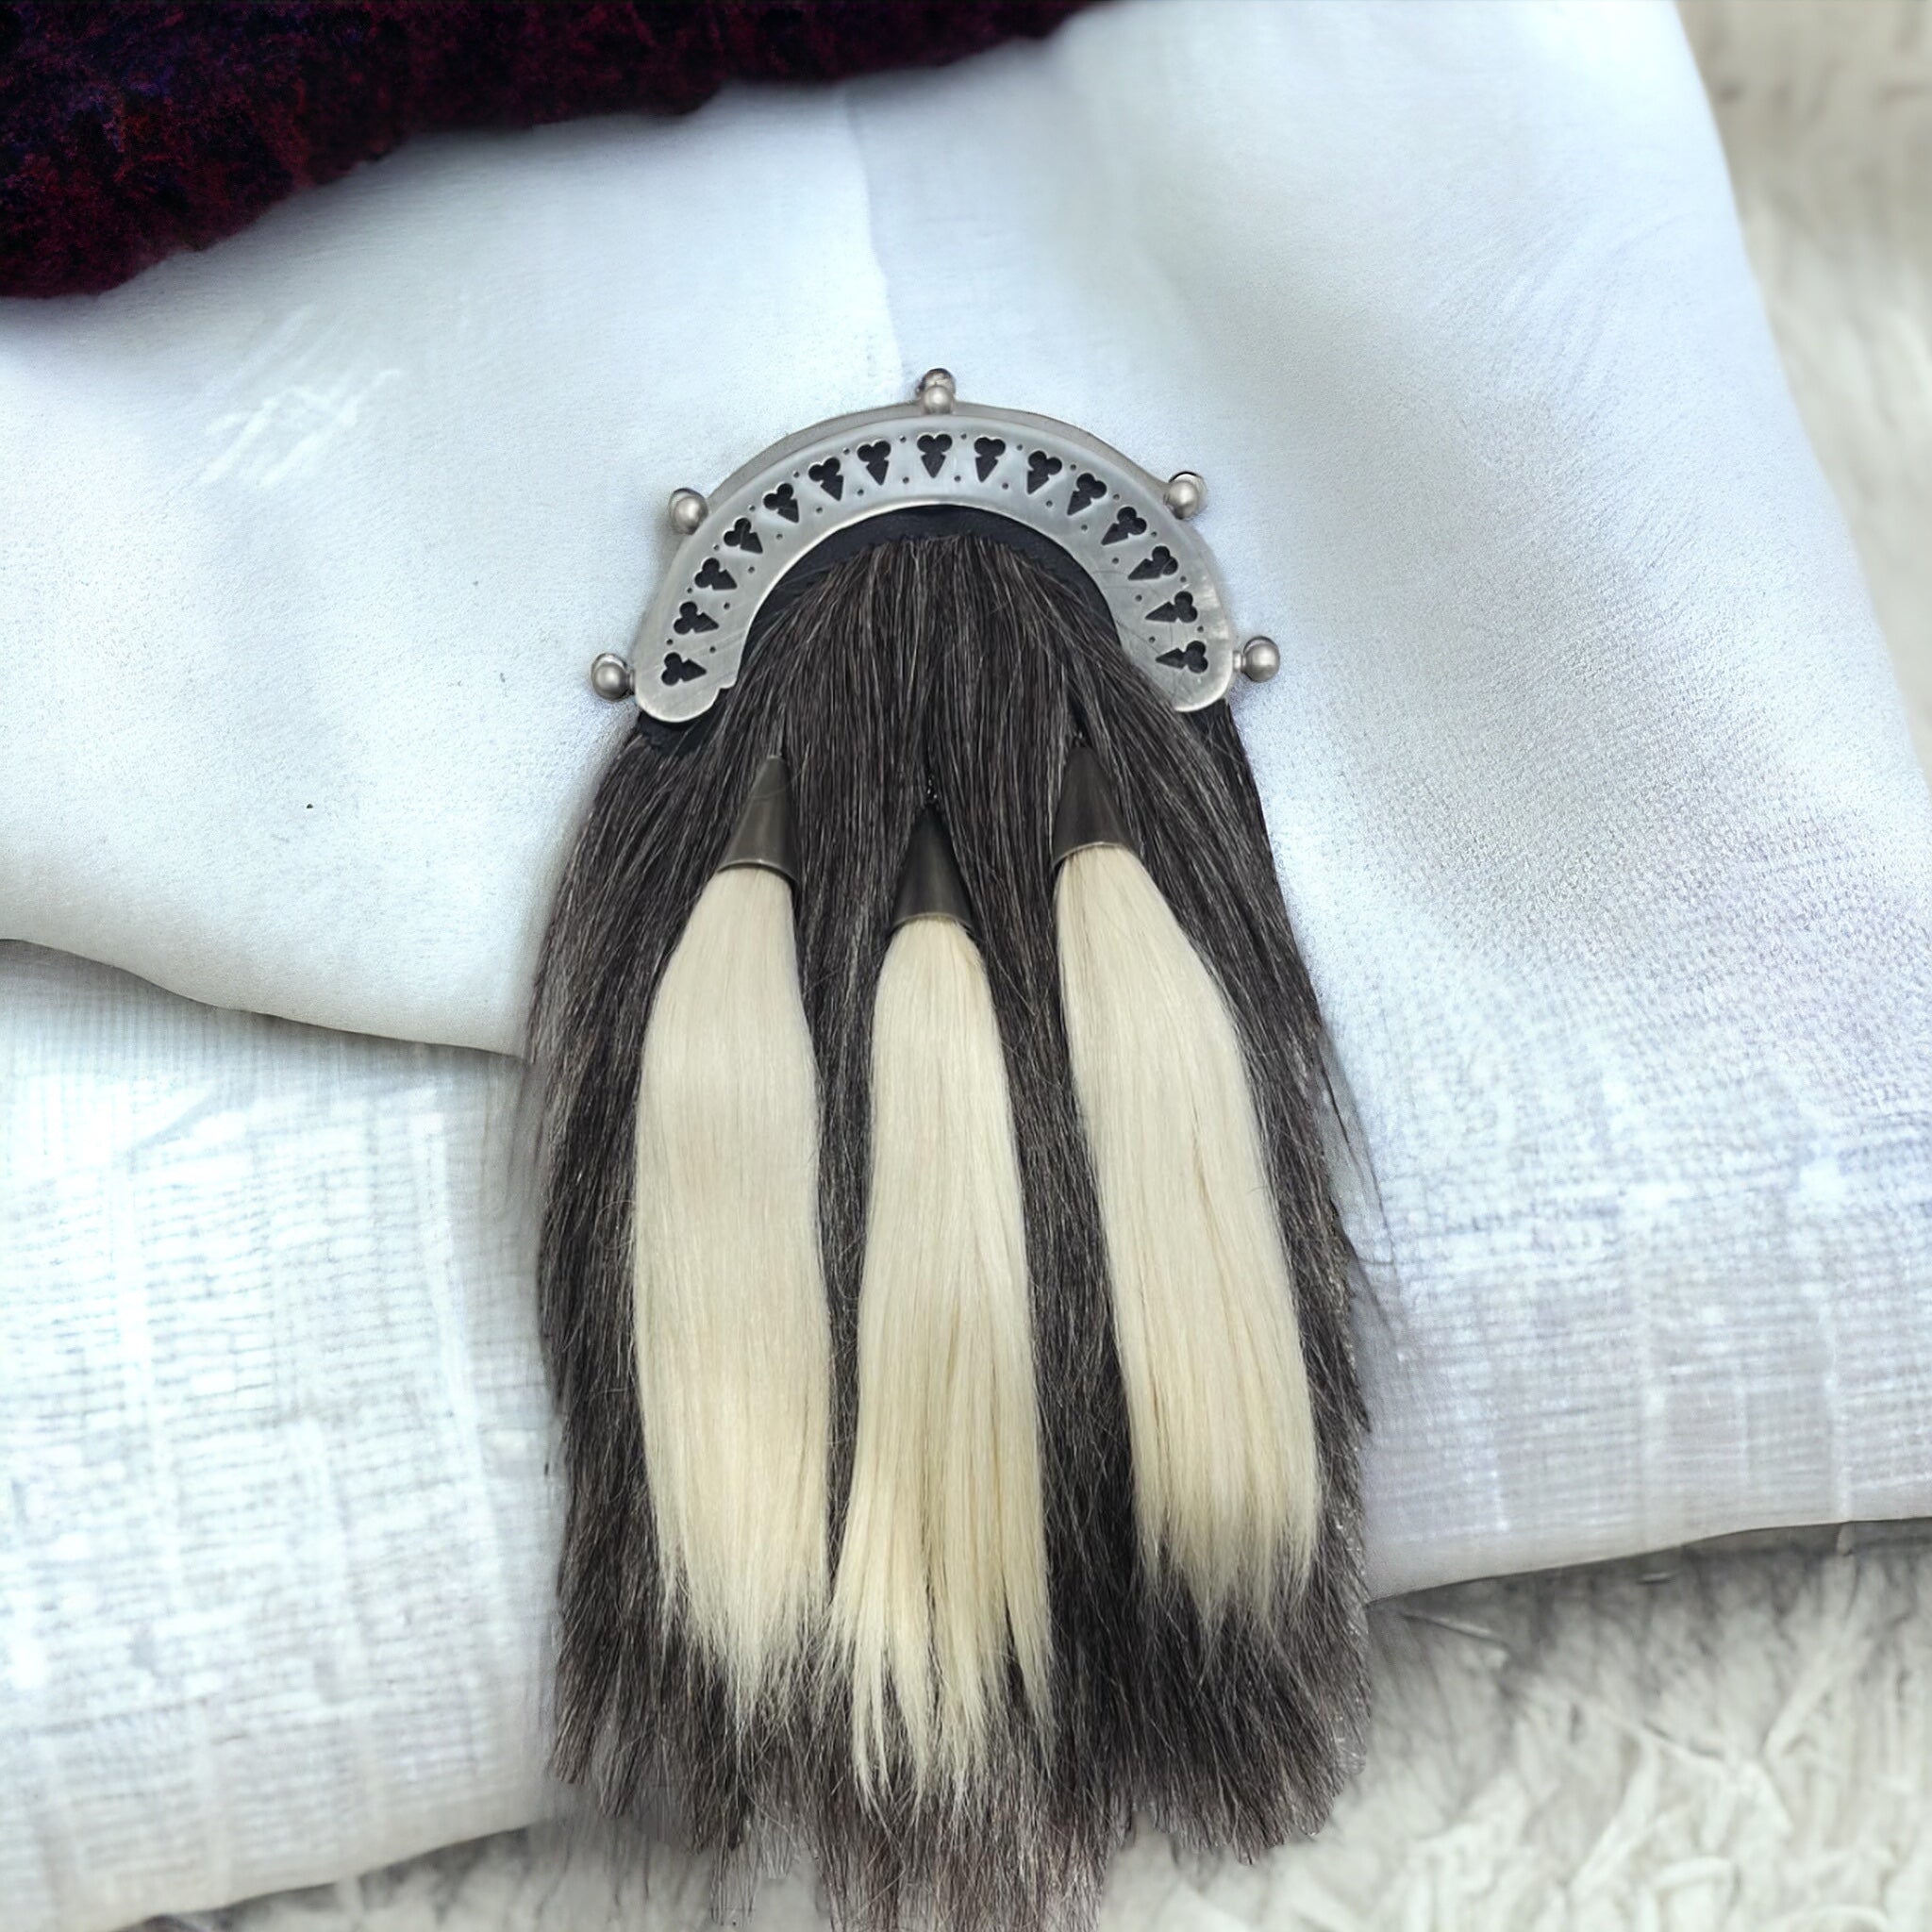 Grey goat hair sporran with three white tassels and London Scottish inspired metal work  made by Margaret Morrison